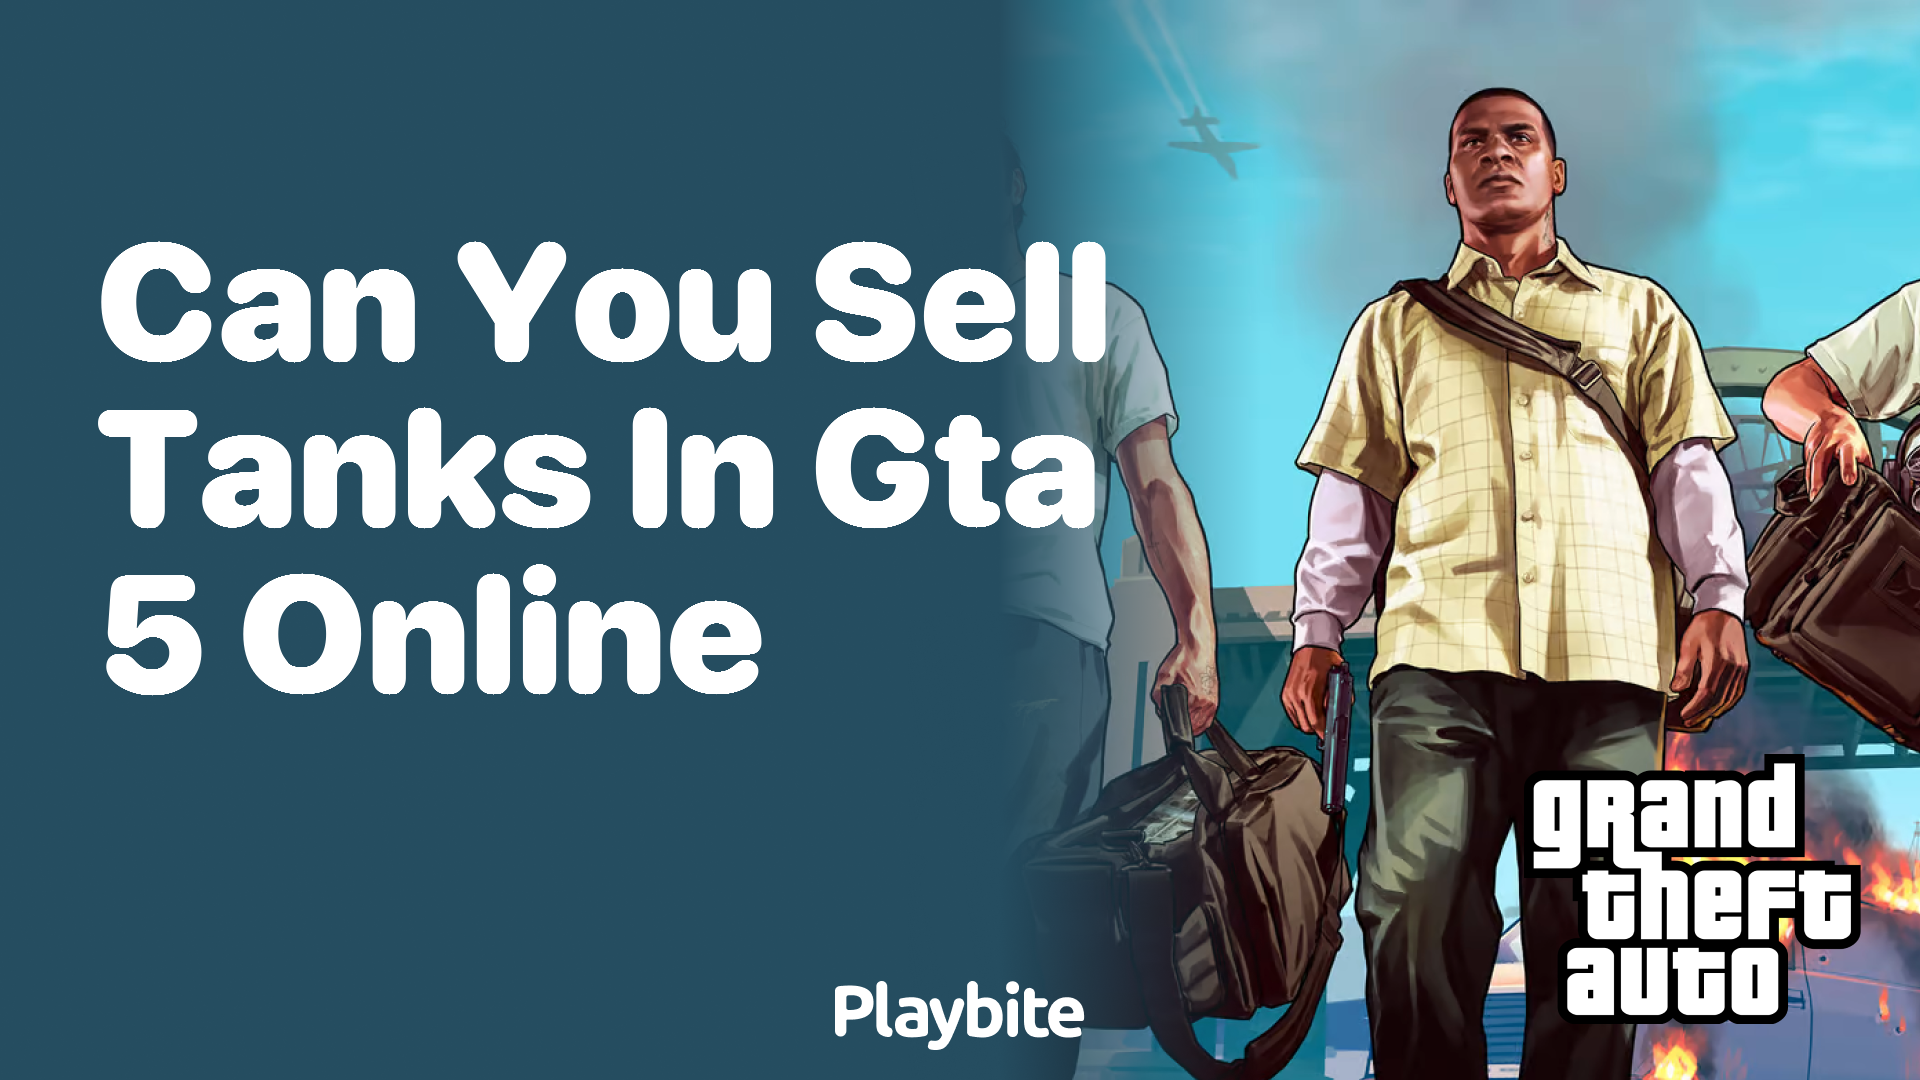 Can you sell tanks in GTA 5 Online?